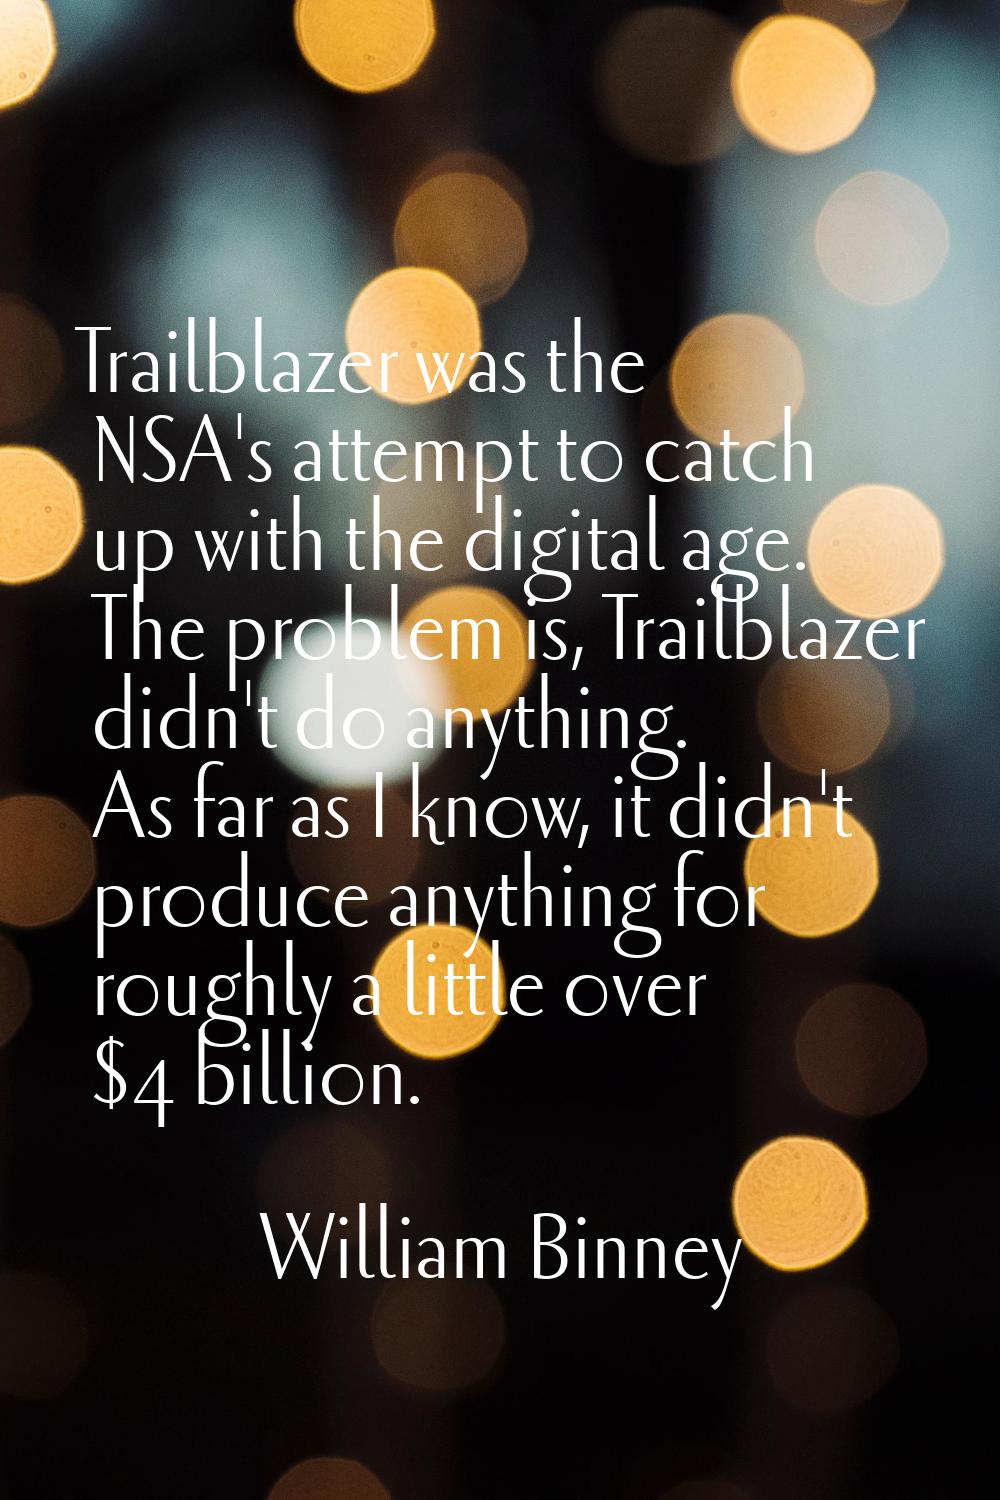 Trailblazer was the NSA's attempt to catch up with the digital age. The problem is, Trailblazer did